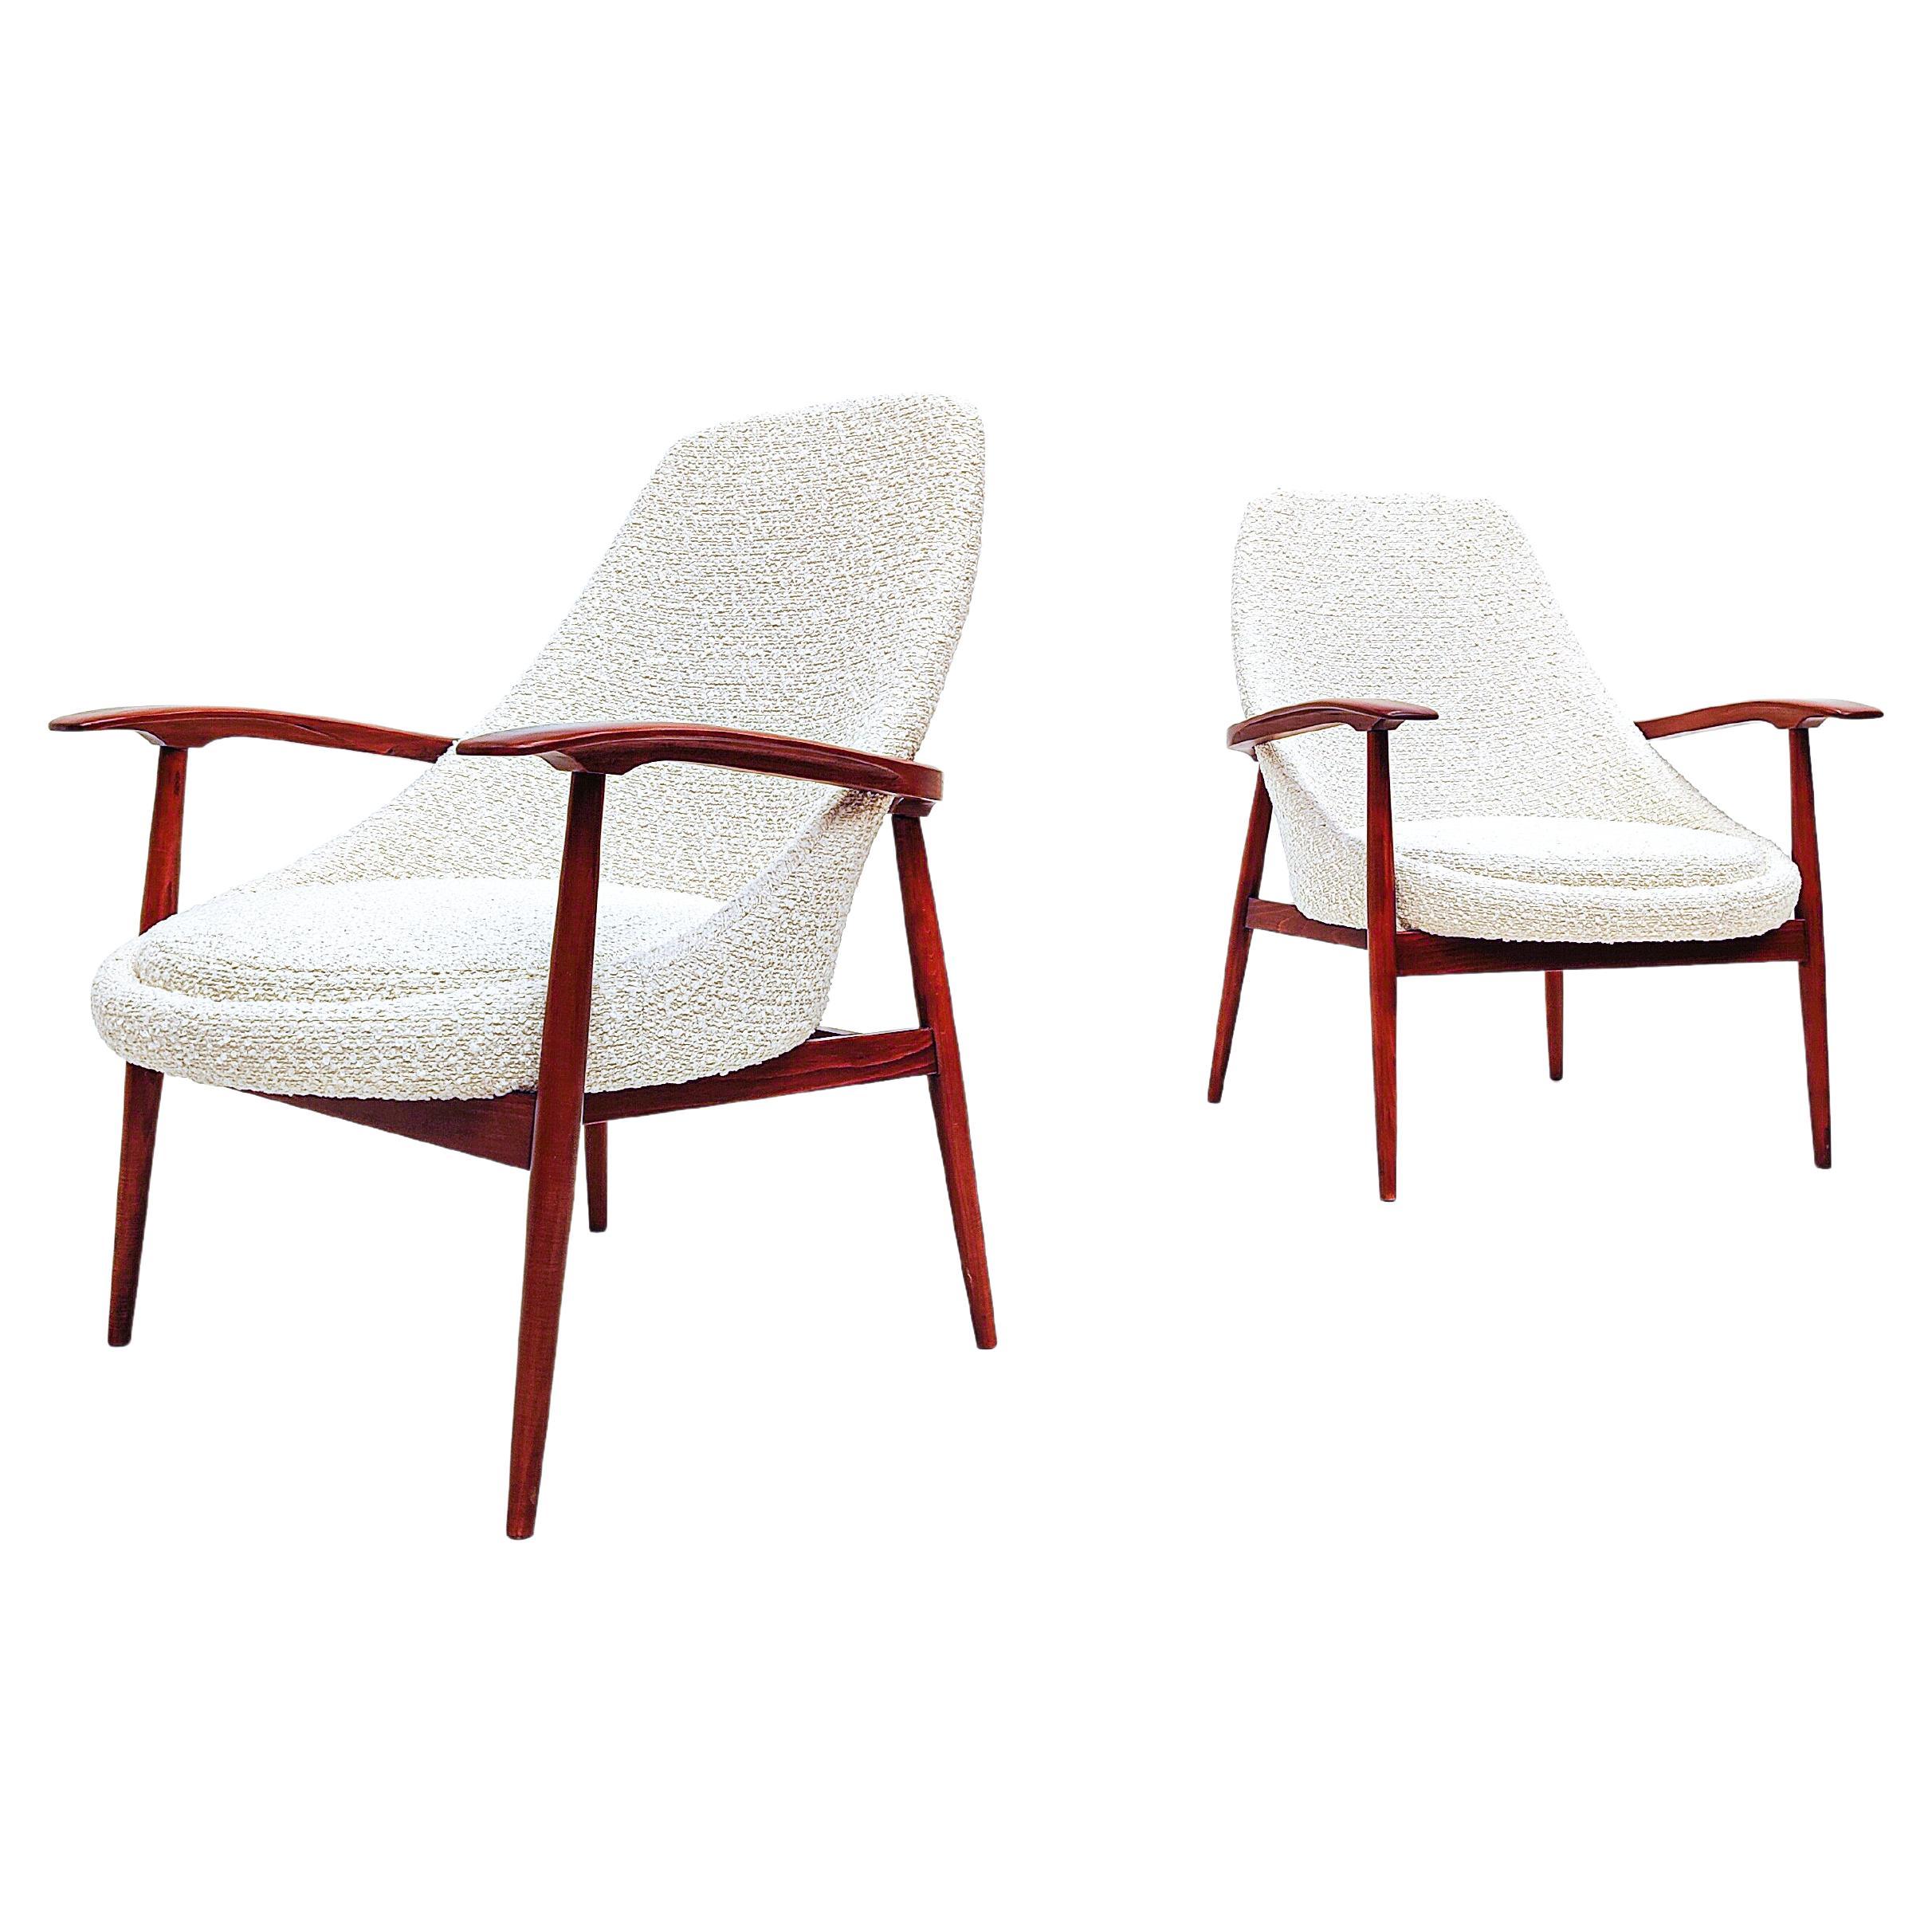 Pair of Mid-Century Armchairs, Wood and White Boucle Fabric, Italy 1960s